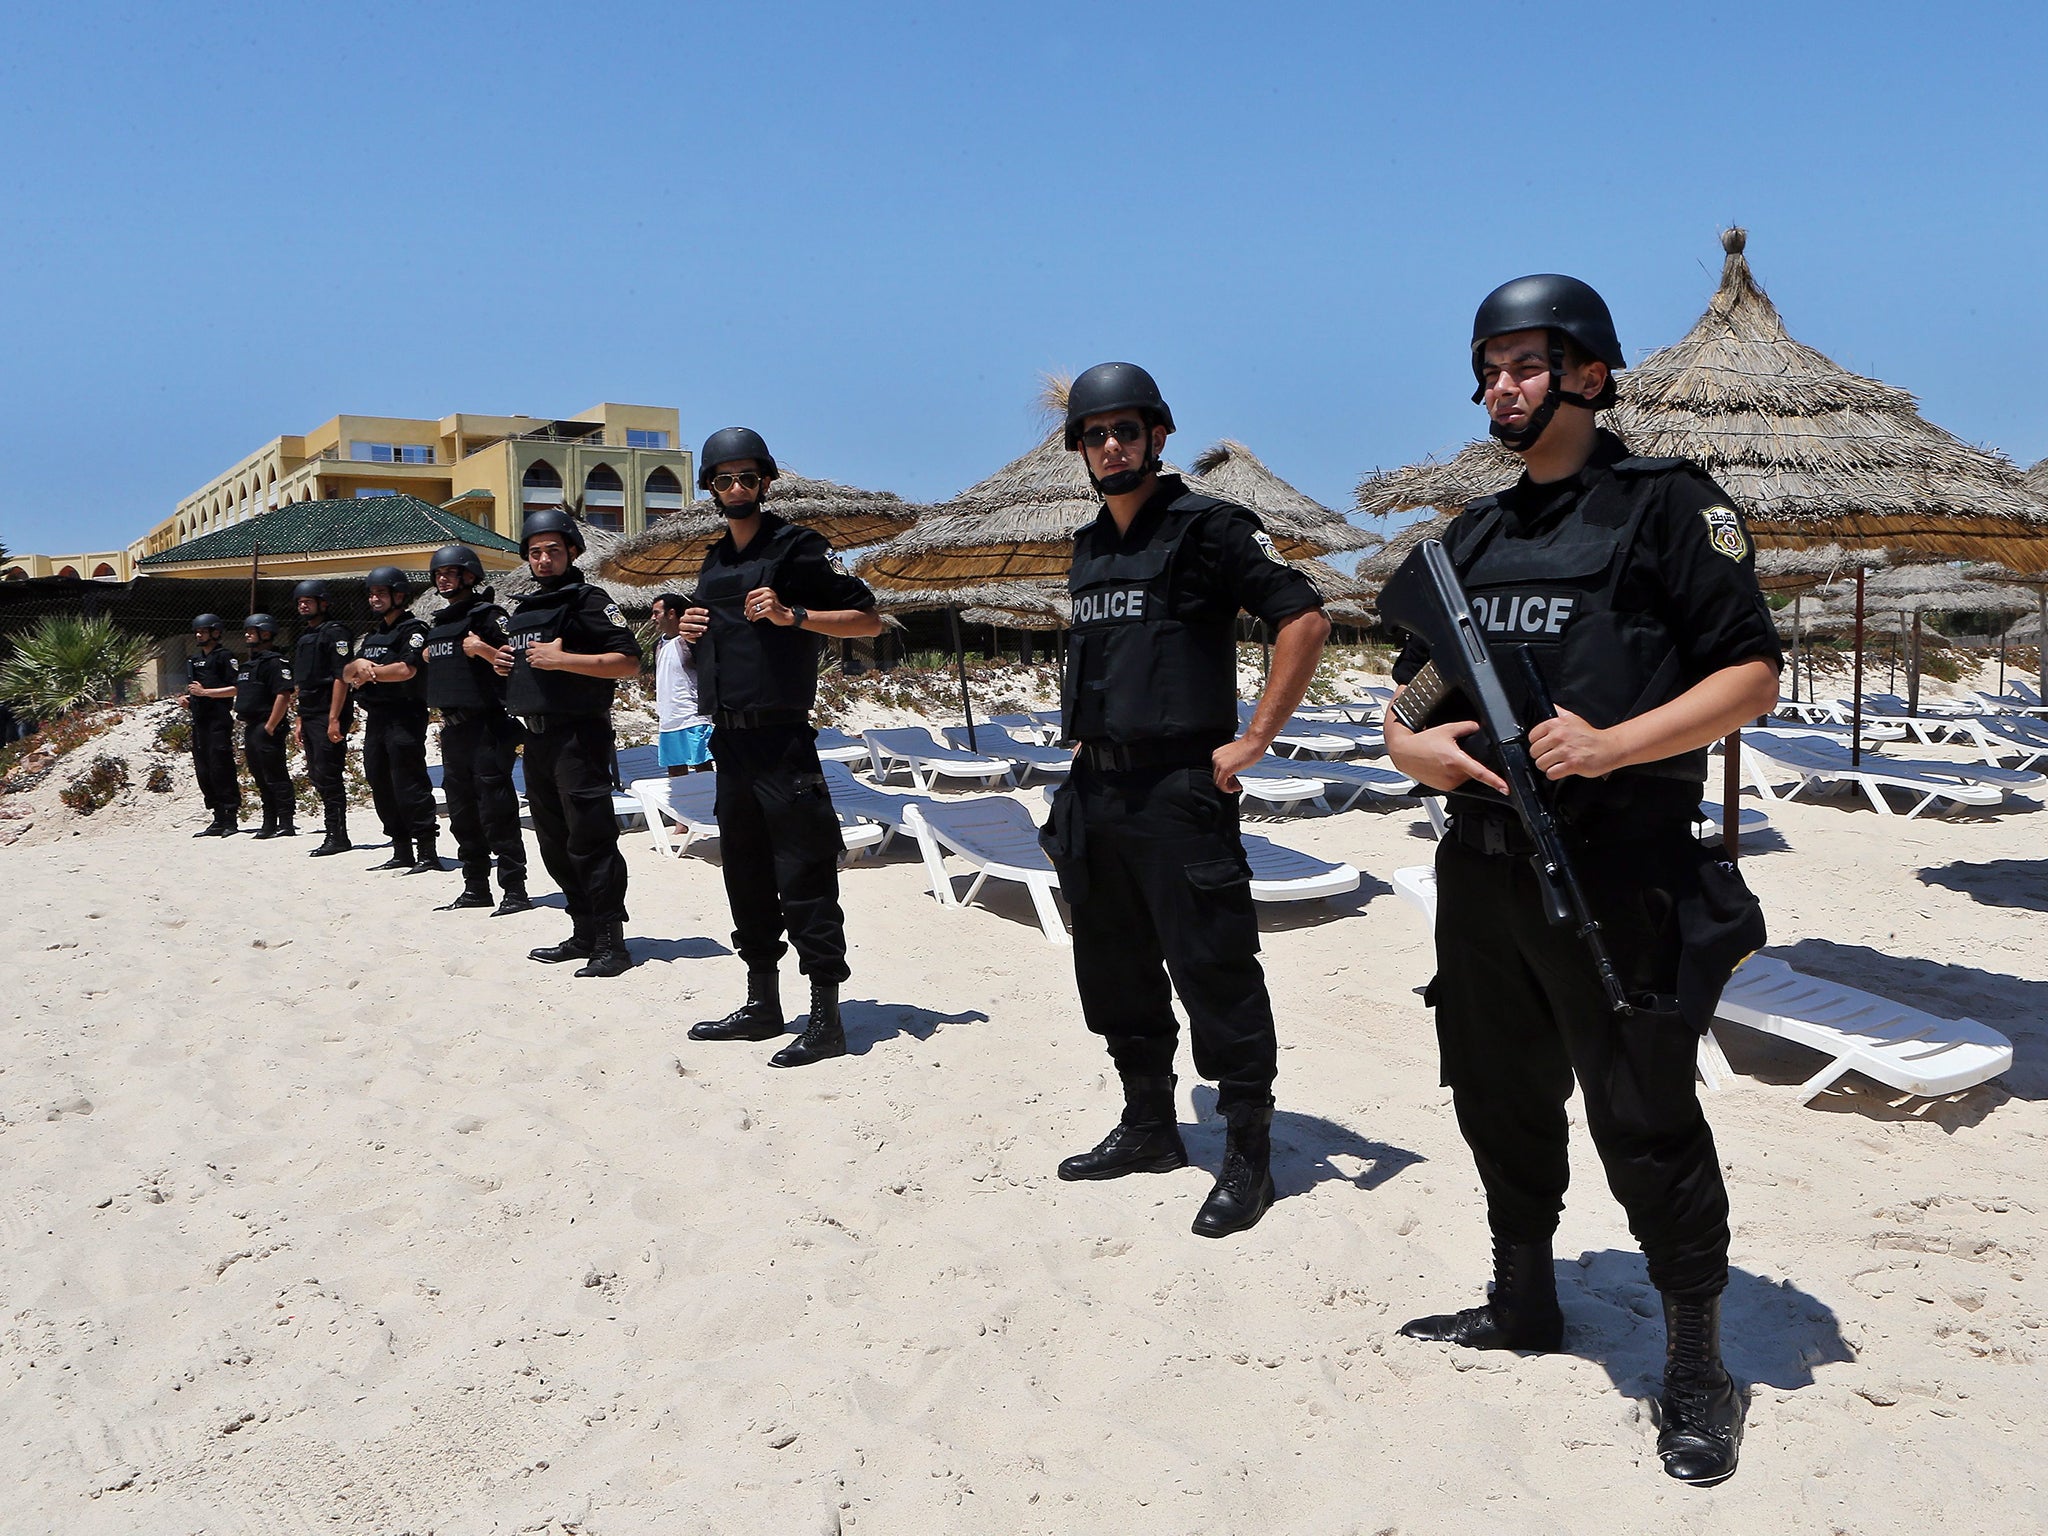 Members of the Tunisian security services stand guard during a memorial ceremony and minutes silence for the victims of the Sousse terror attack